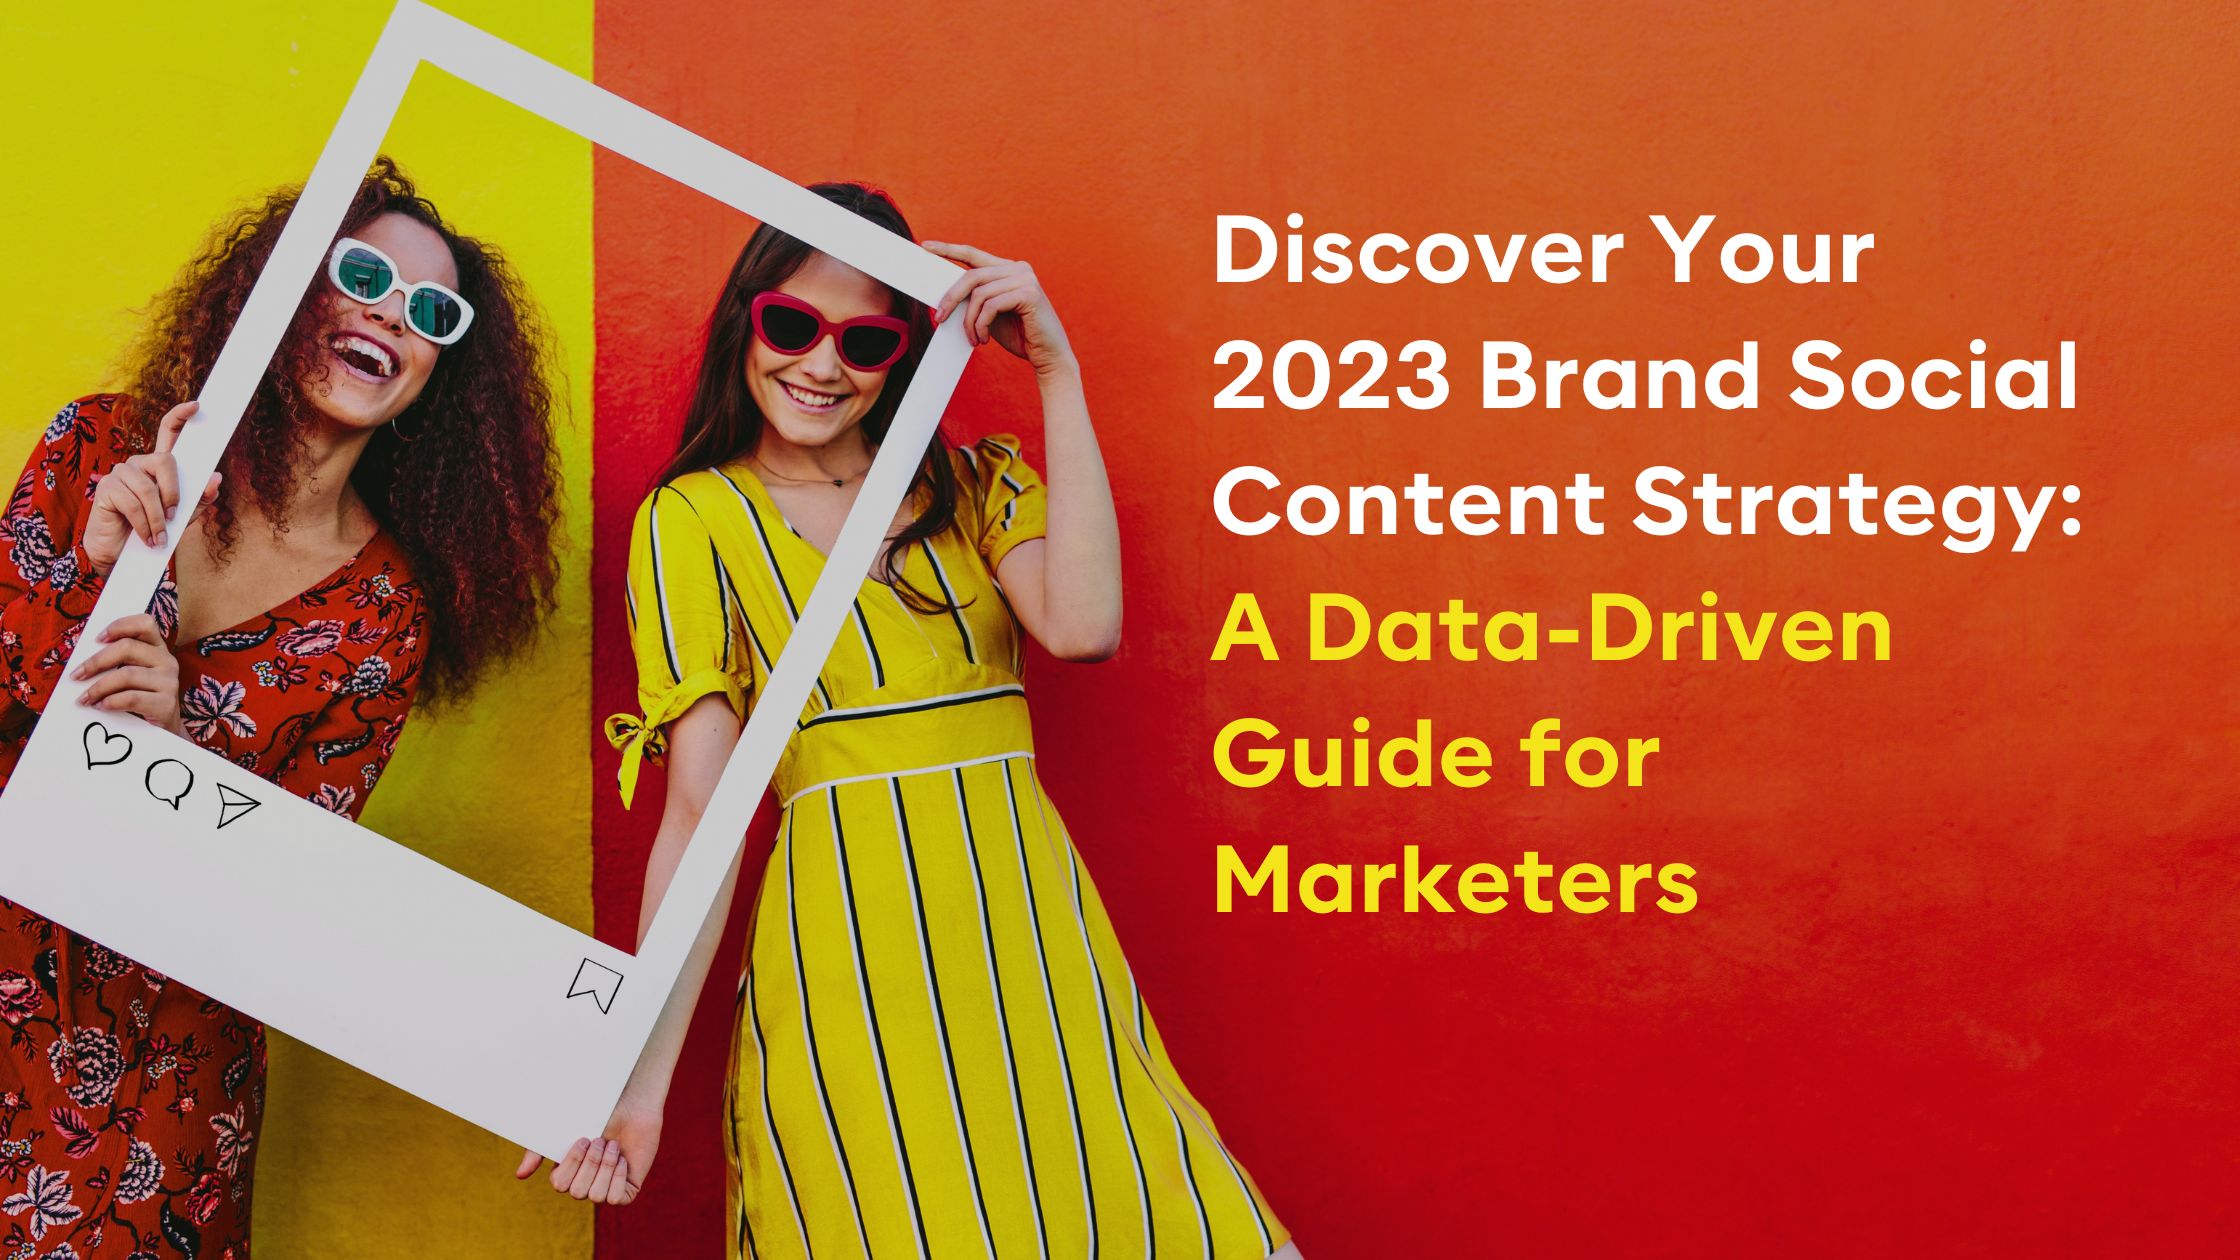 Discover Your 2023 Brand Social Content Strategy